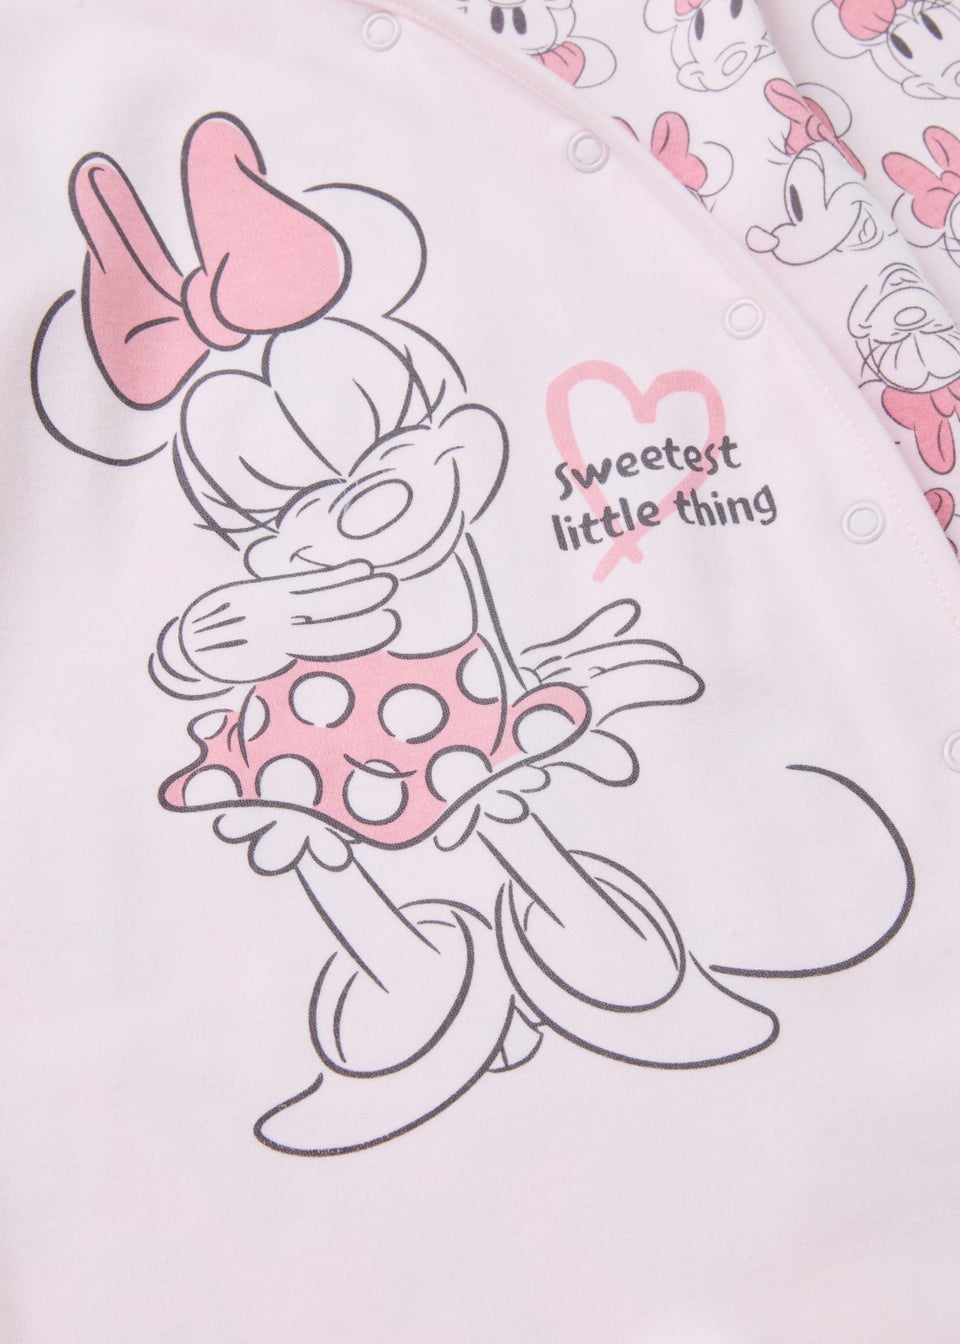 How to Draw Minnie Mouse Easy | Disney Ufufy - YouTube